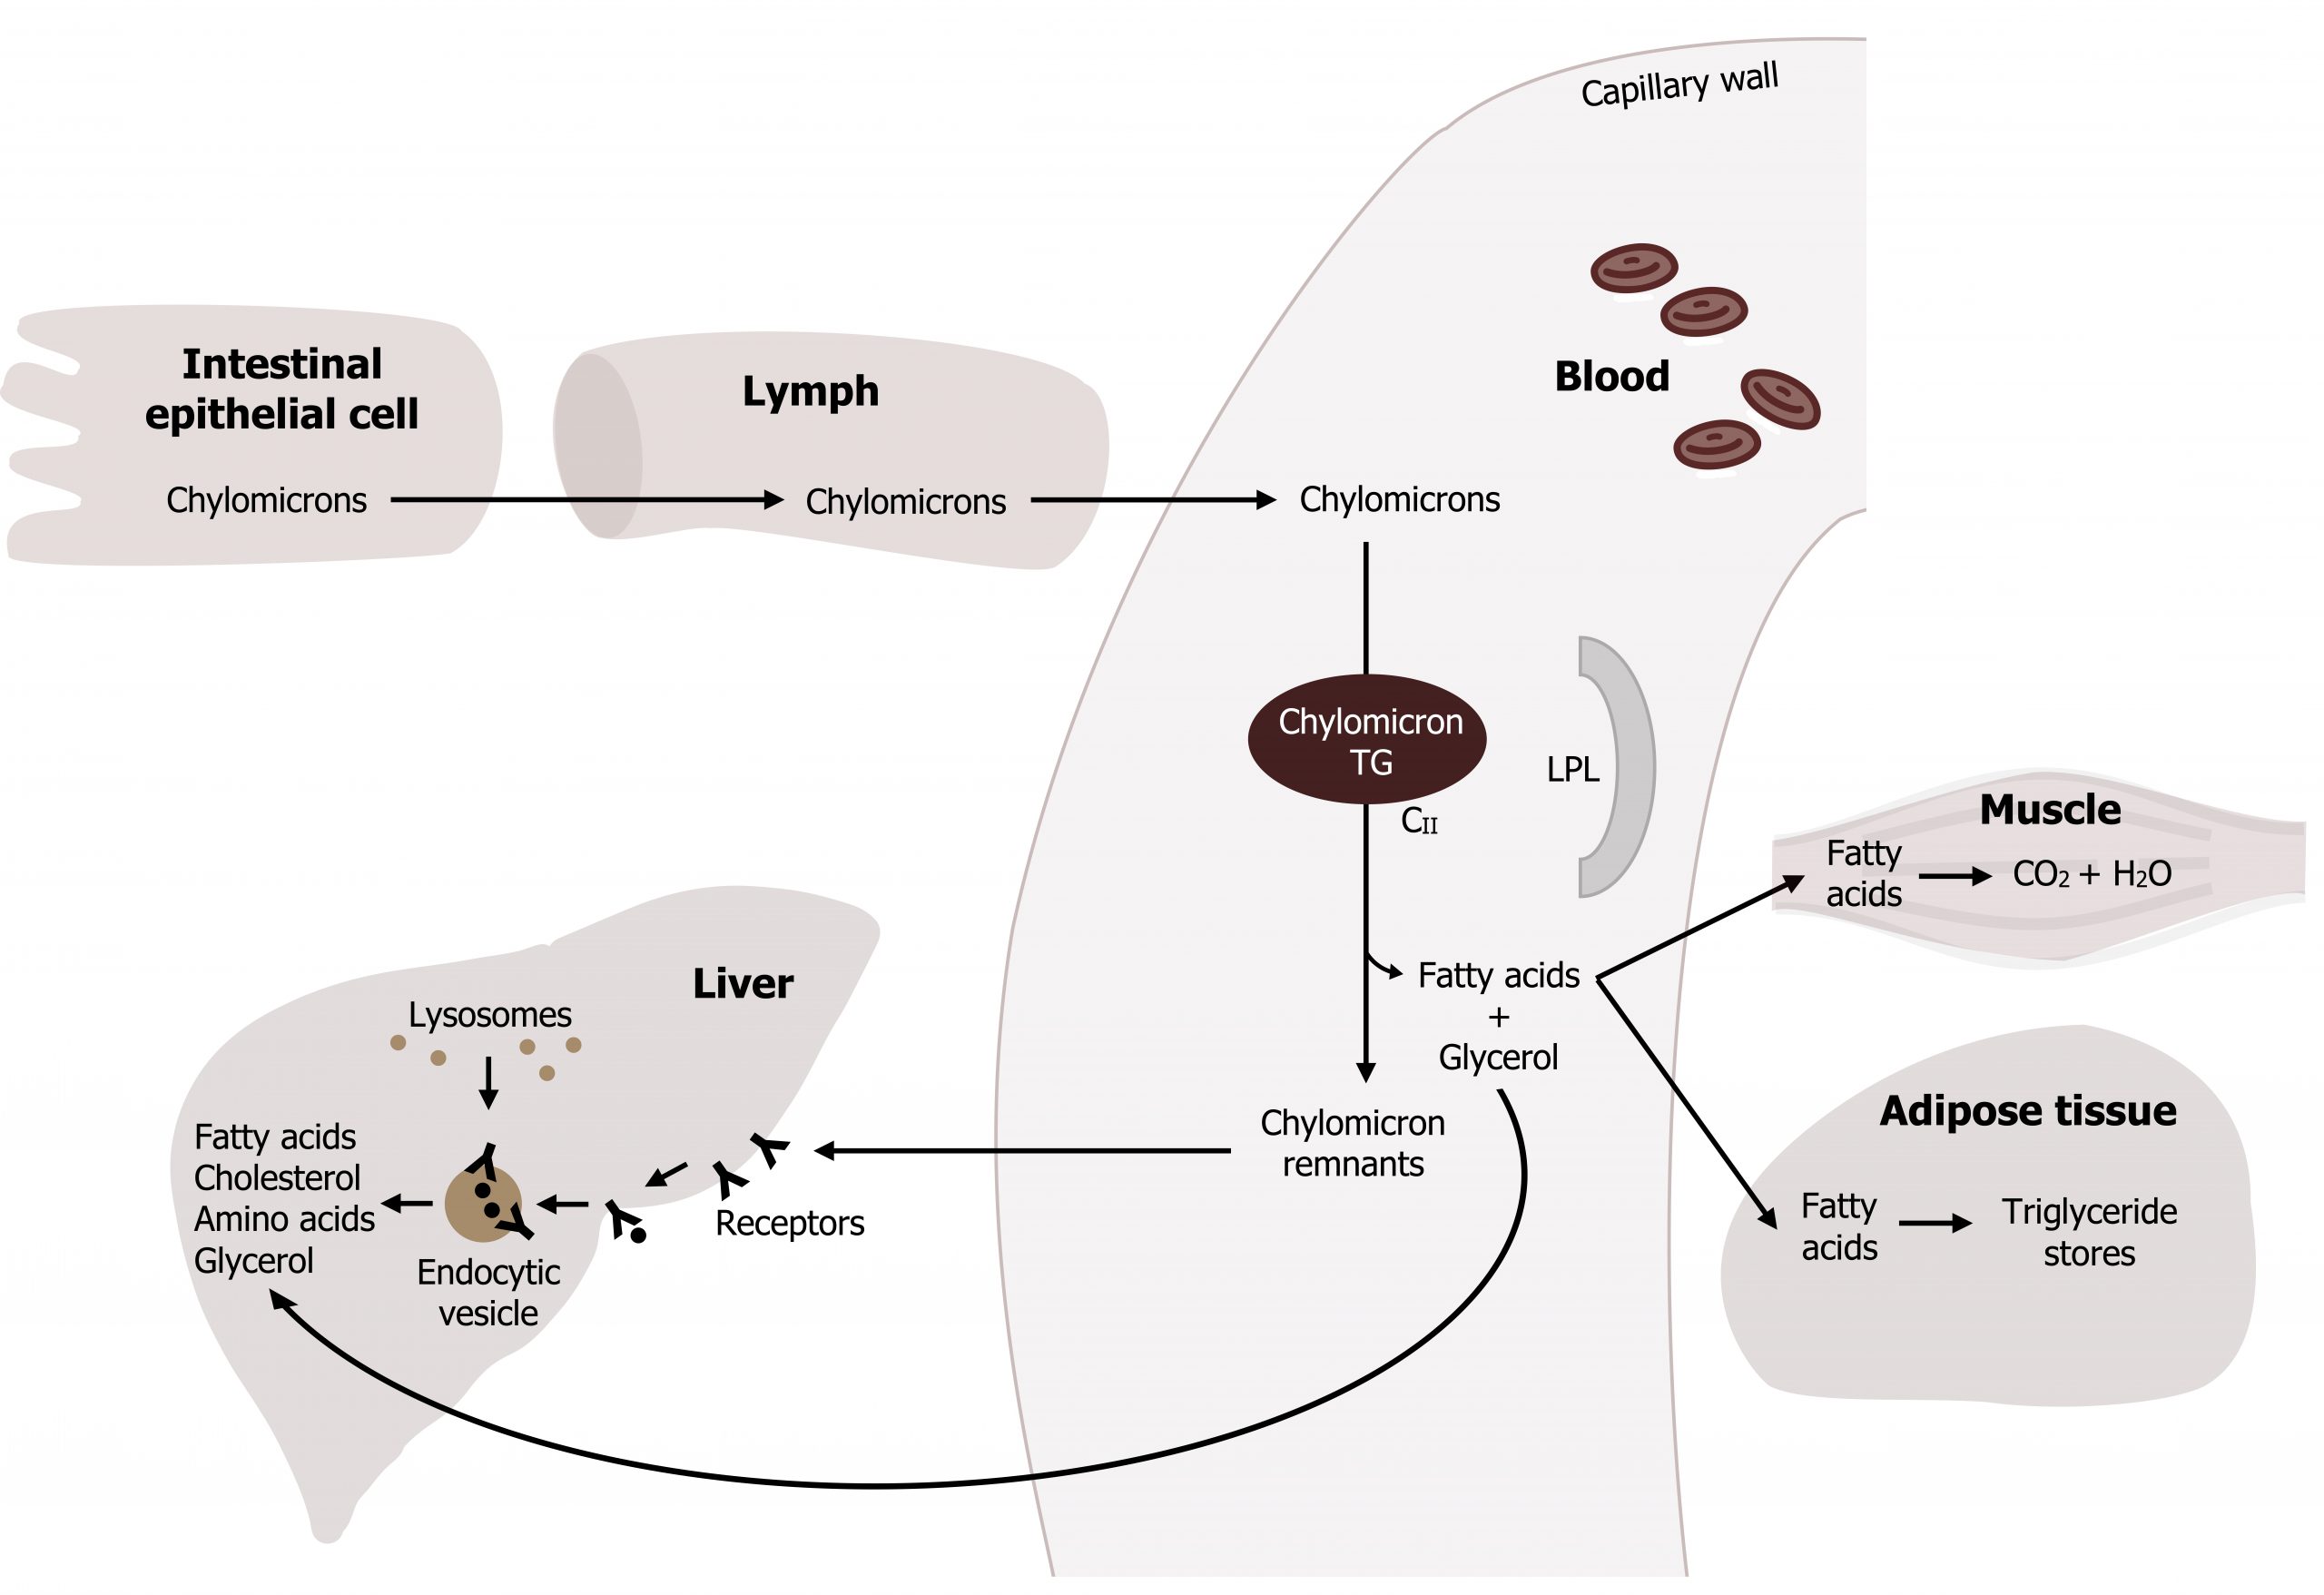 Chylomicrons move from intestinal epithelial cells, to lymph, to blood. Chylomicrons arrow with chylomicron TG to chylomicron remnants to liver receptors to endocytic vesicle to fatty acids, cholesterol, amino acids, and glycerol. Fatty acids and glycerol move from blood to the liver, muscle, and adipose tissue. In muscle, fatty acids arrow CO2 and H2O. In adipose tissue, fatty acids arrow triglyceride stores.